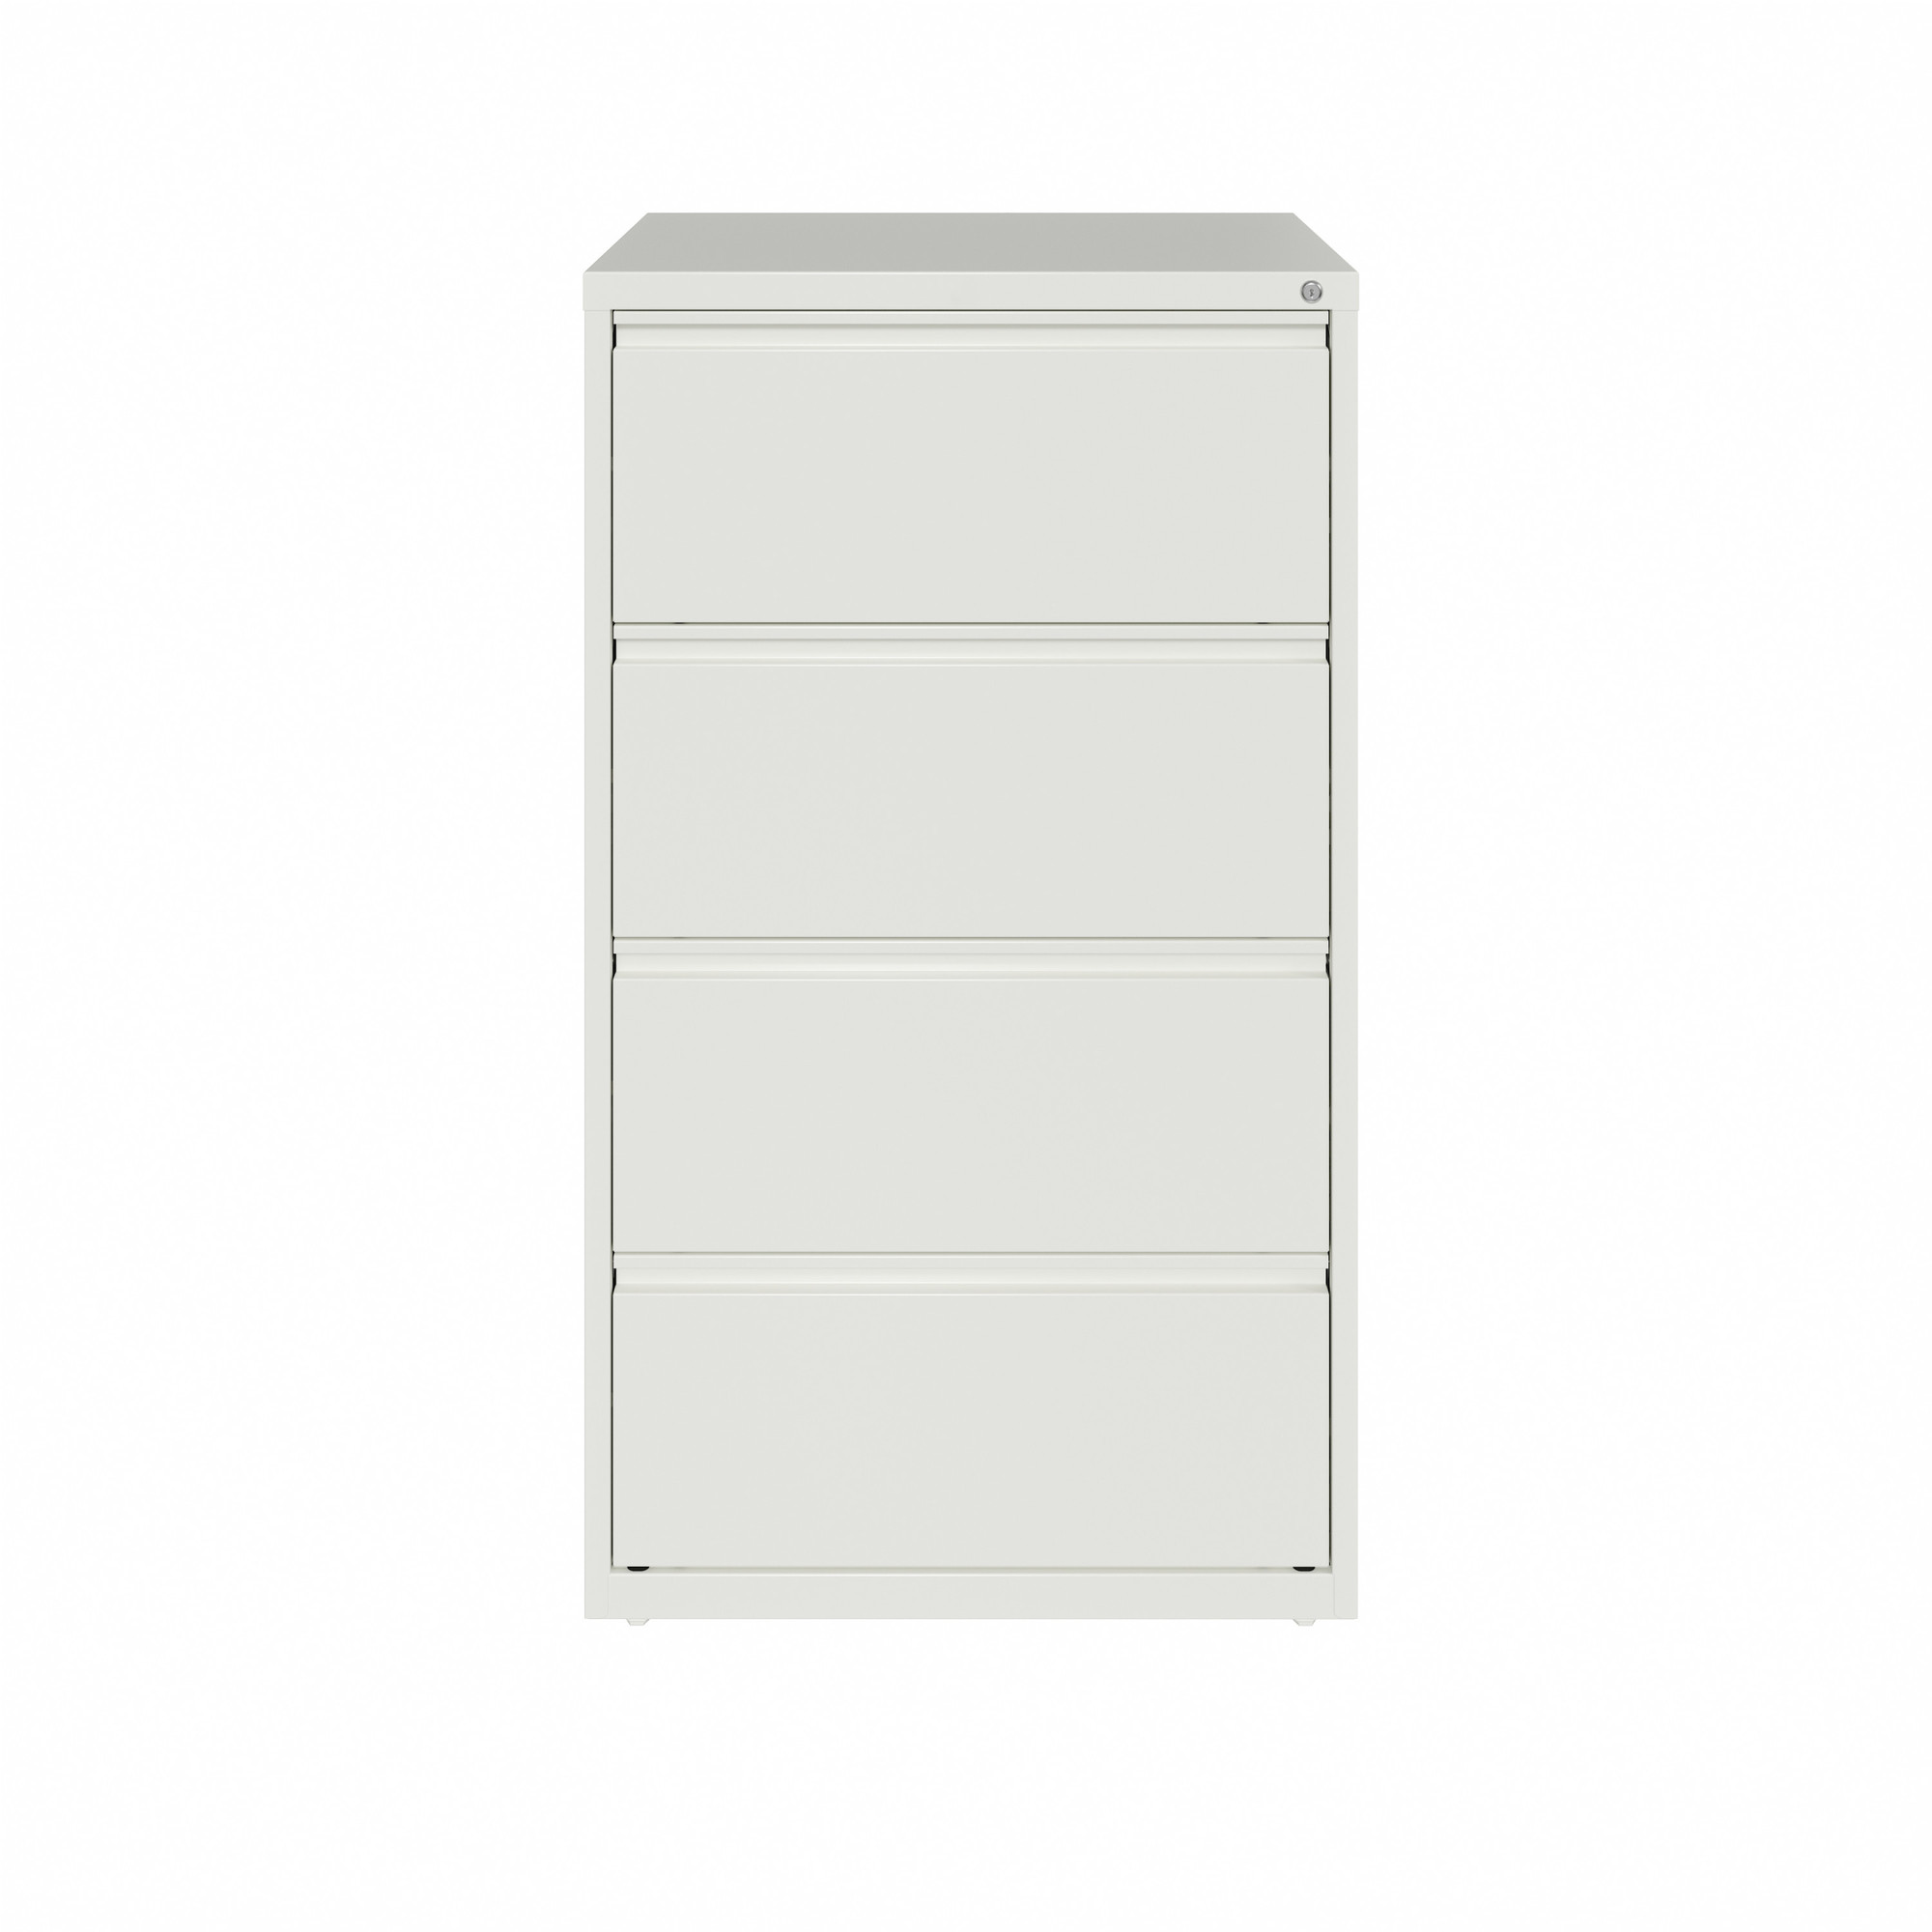 Hirsh Industries, 4 Drawer Lateral File Cabinet, Width 30 in, Depth 18.625 in, Height 52.5 in, Model 23698